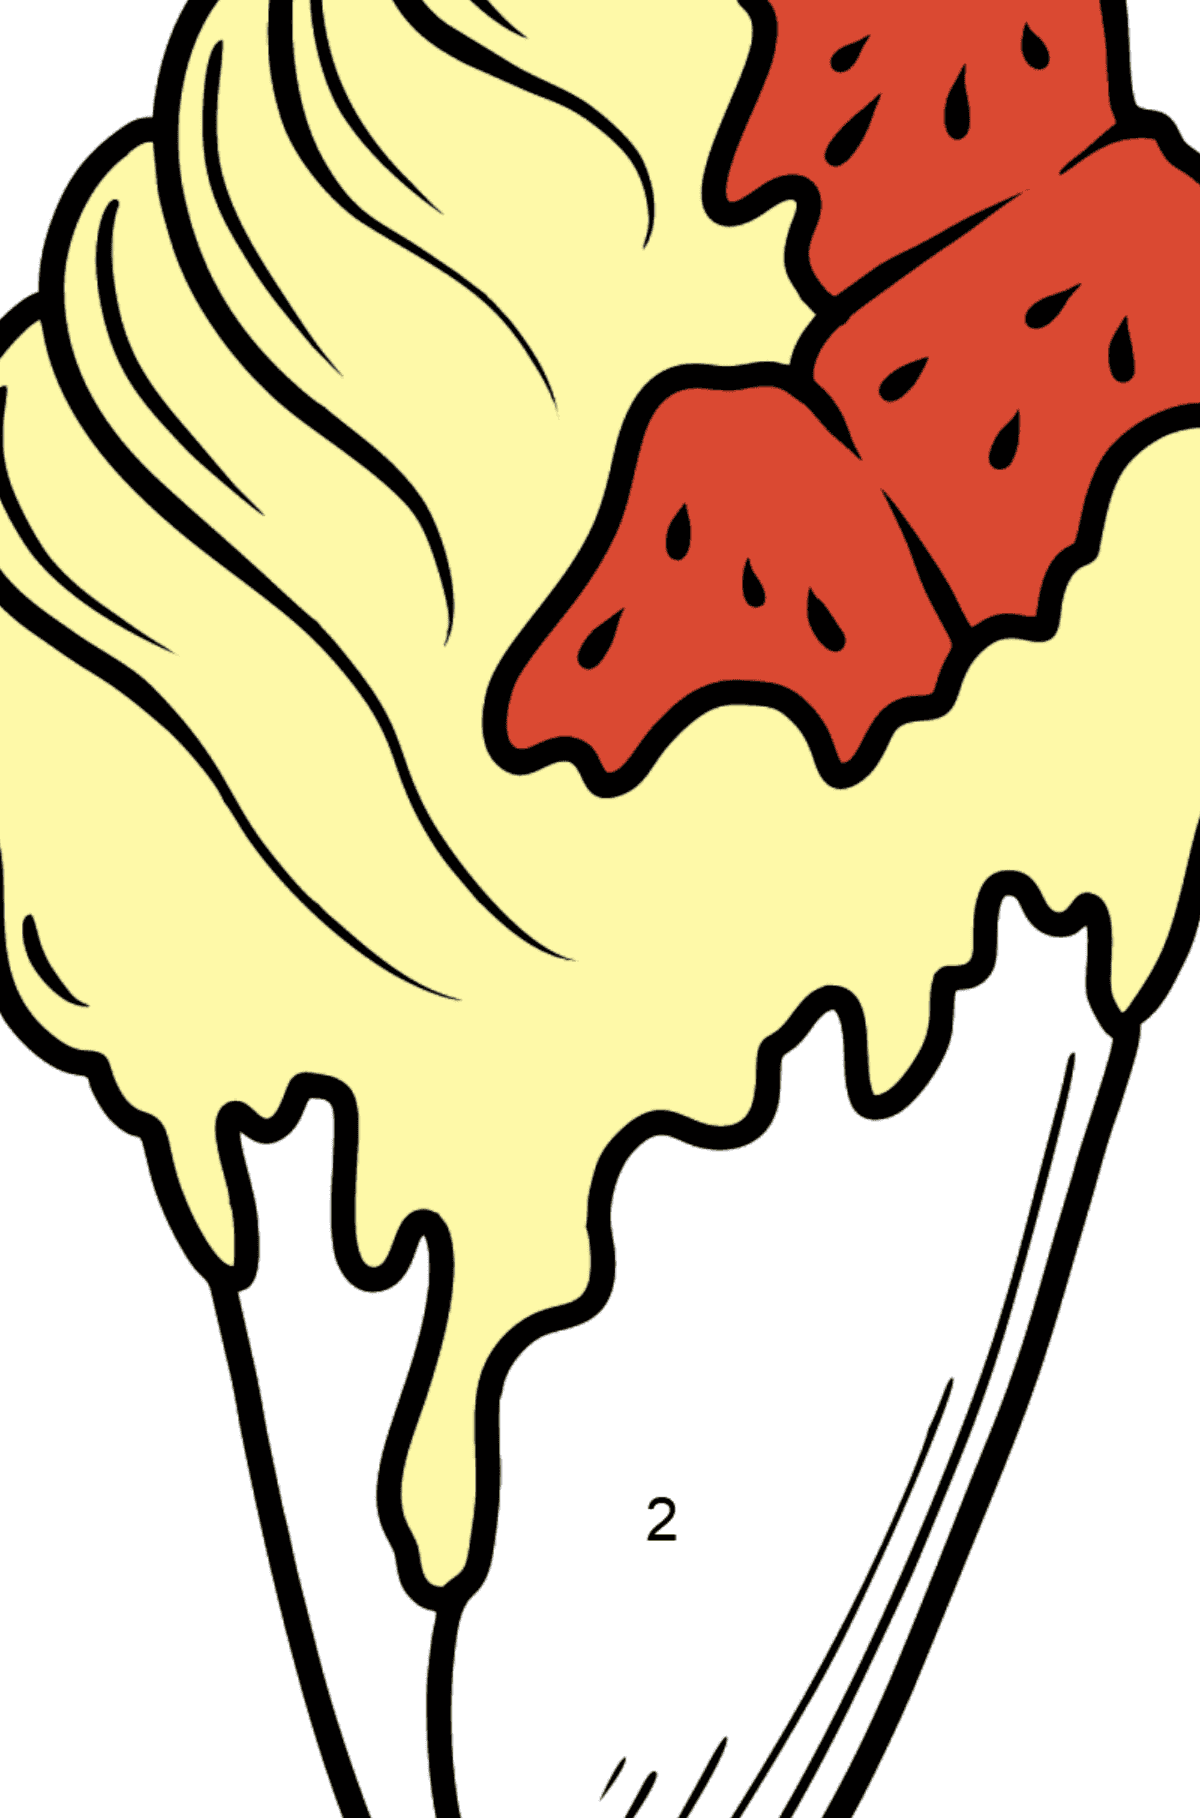 Banana Ice Cream and Jam Cone coloring page - Coloring by Numbers for Kids